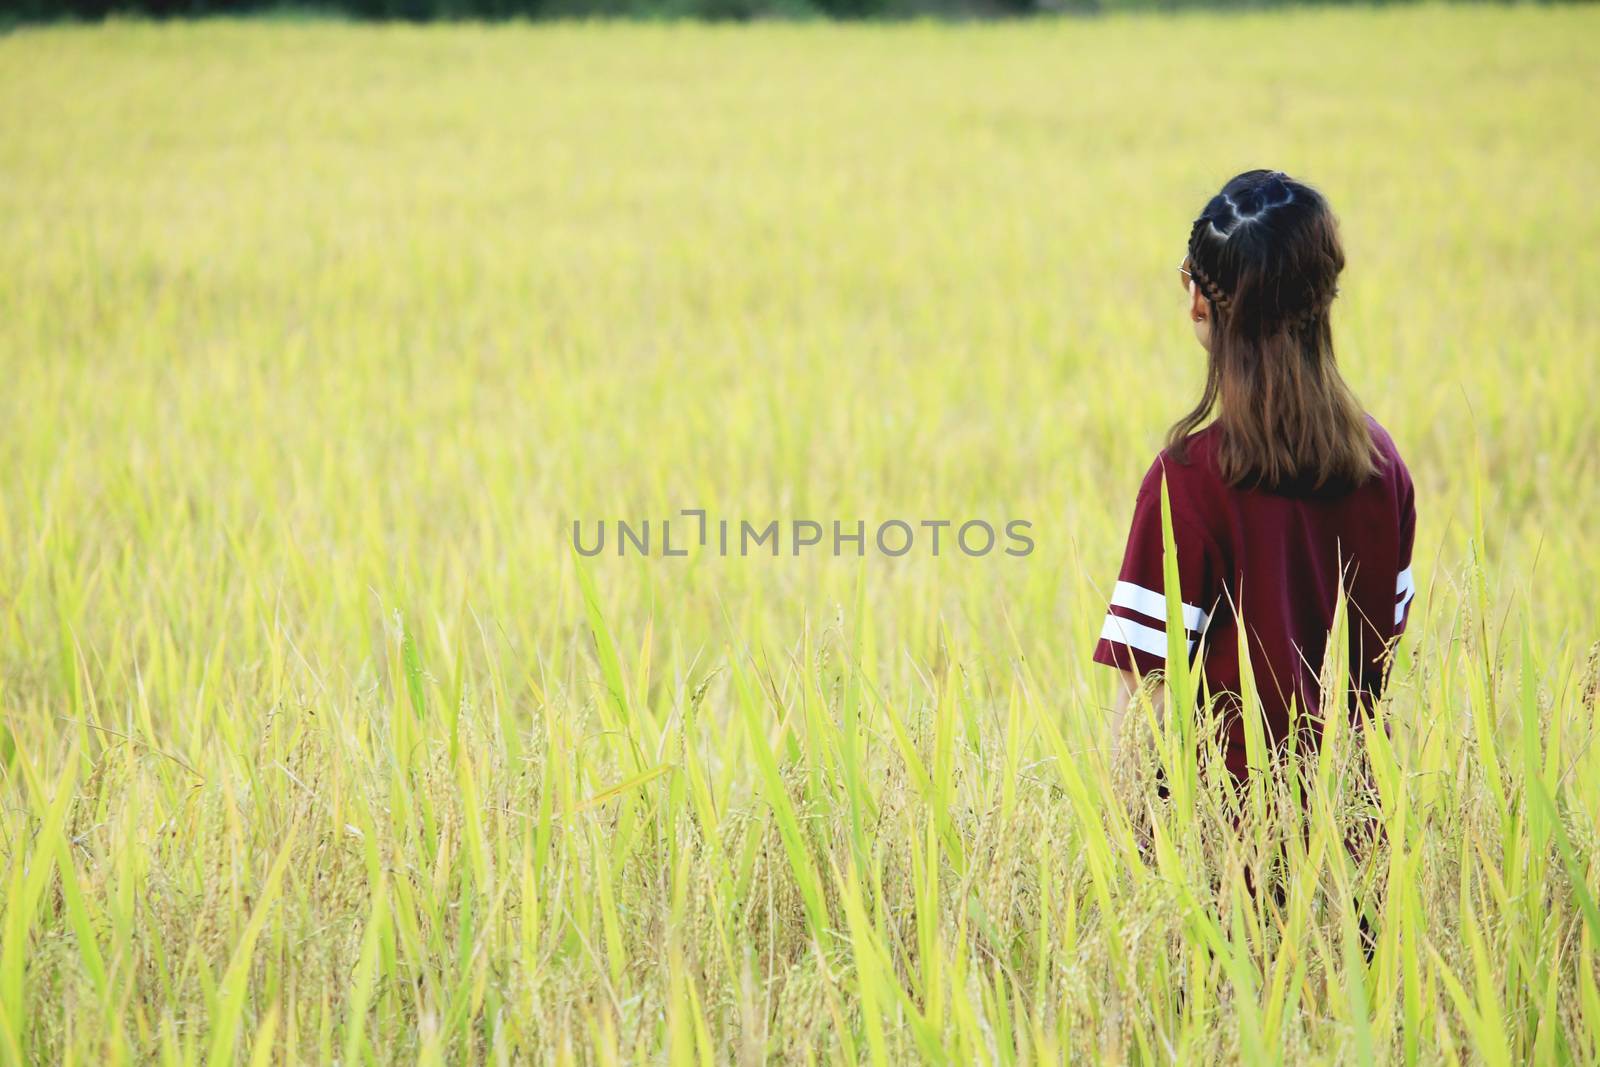 The woman stood back against the view in the middle of the rice field.